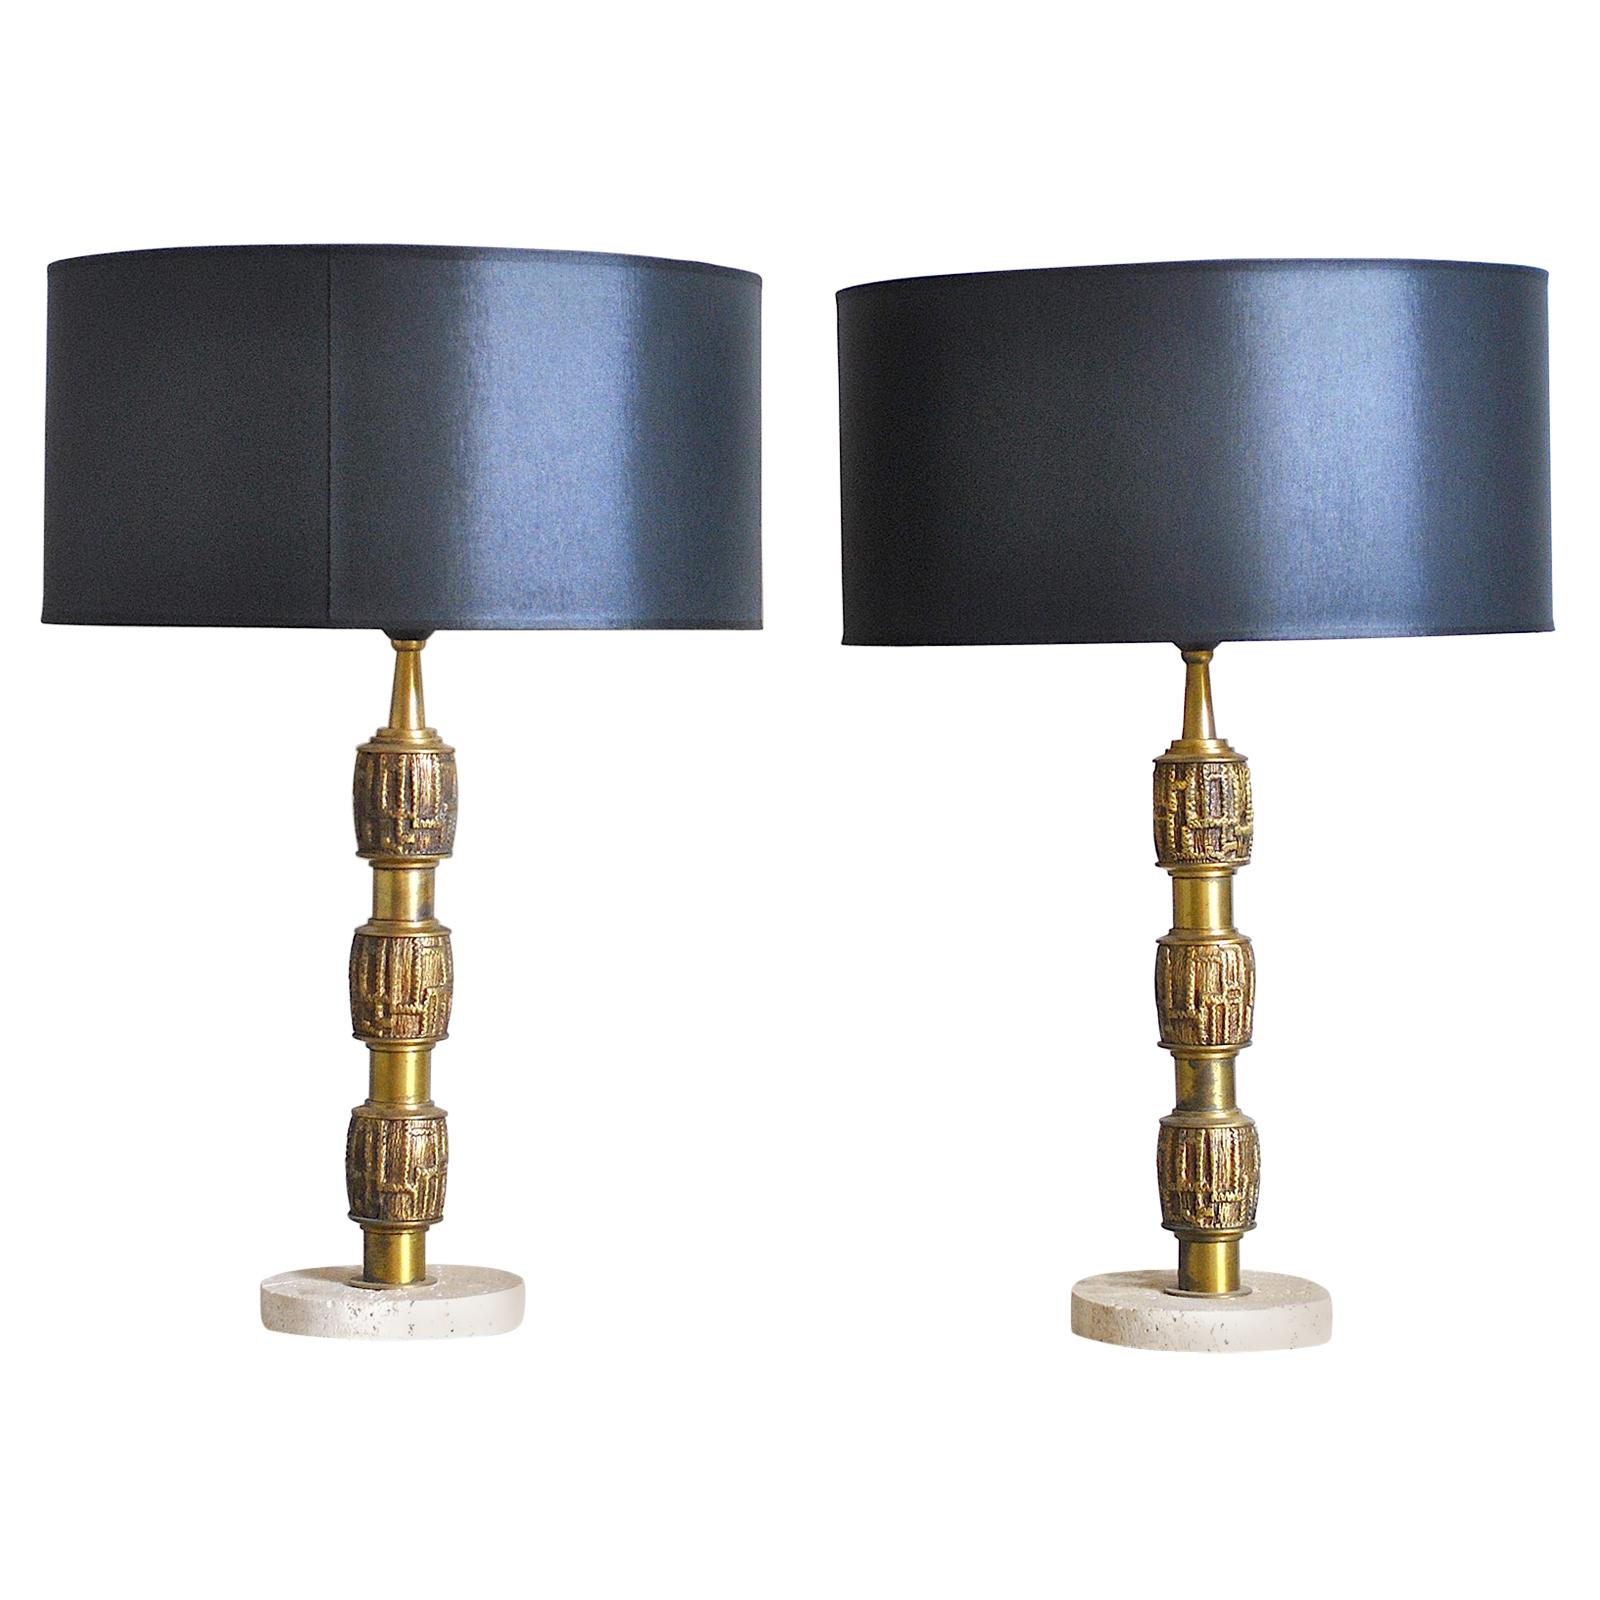 Luciano Frigerio Set of Midcentury Table Lamps in Brass and Travertine, 1970s For Sale